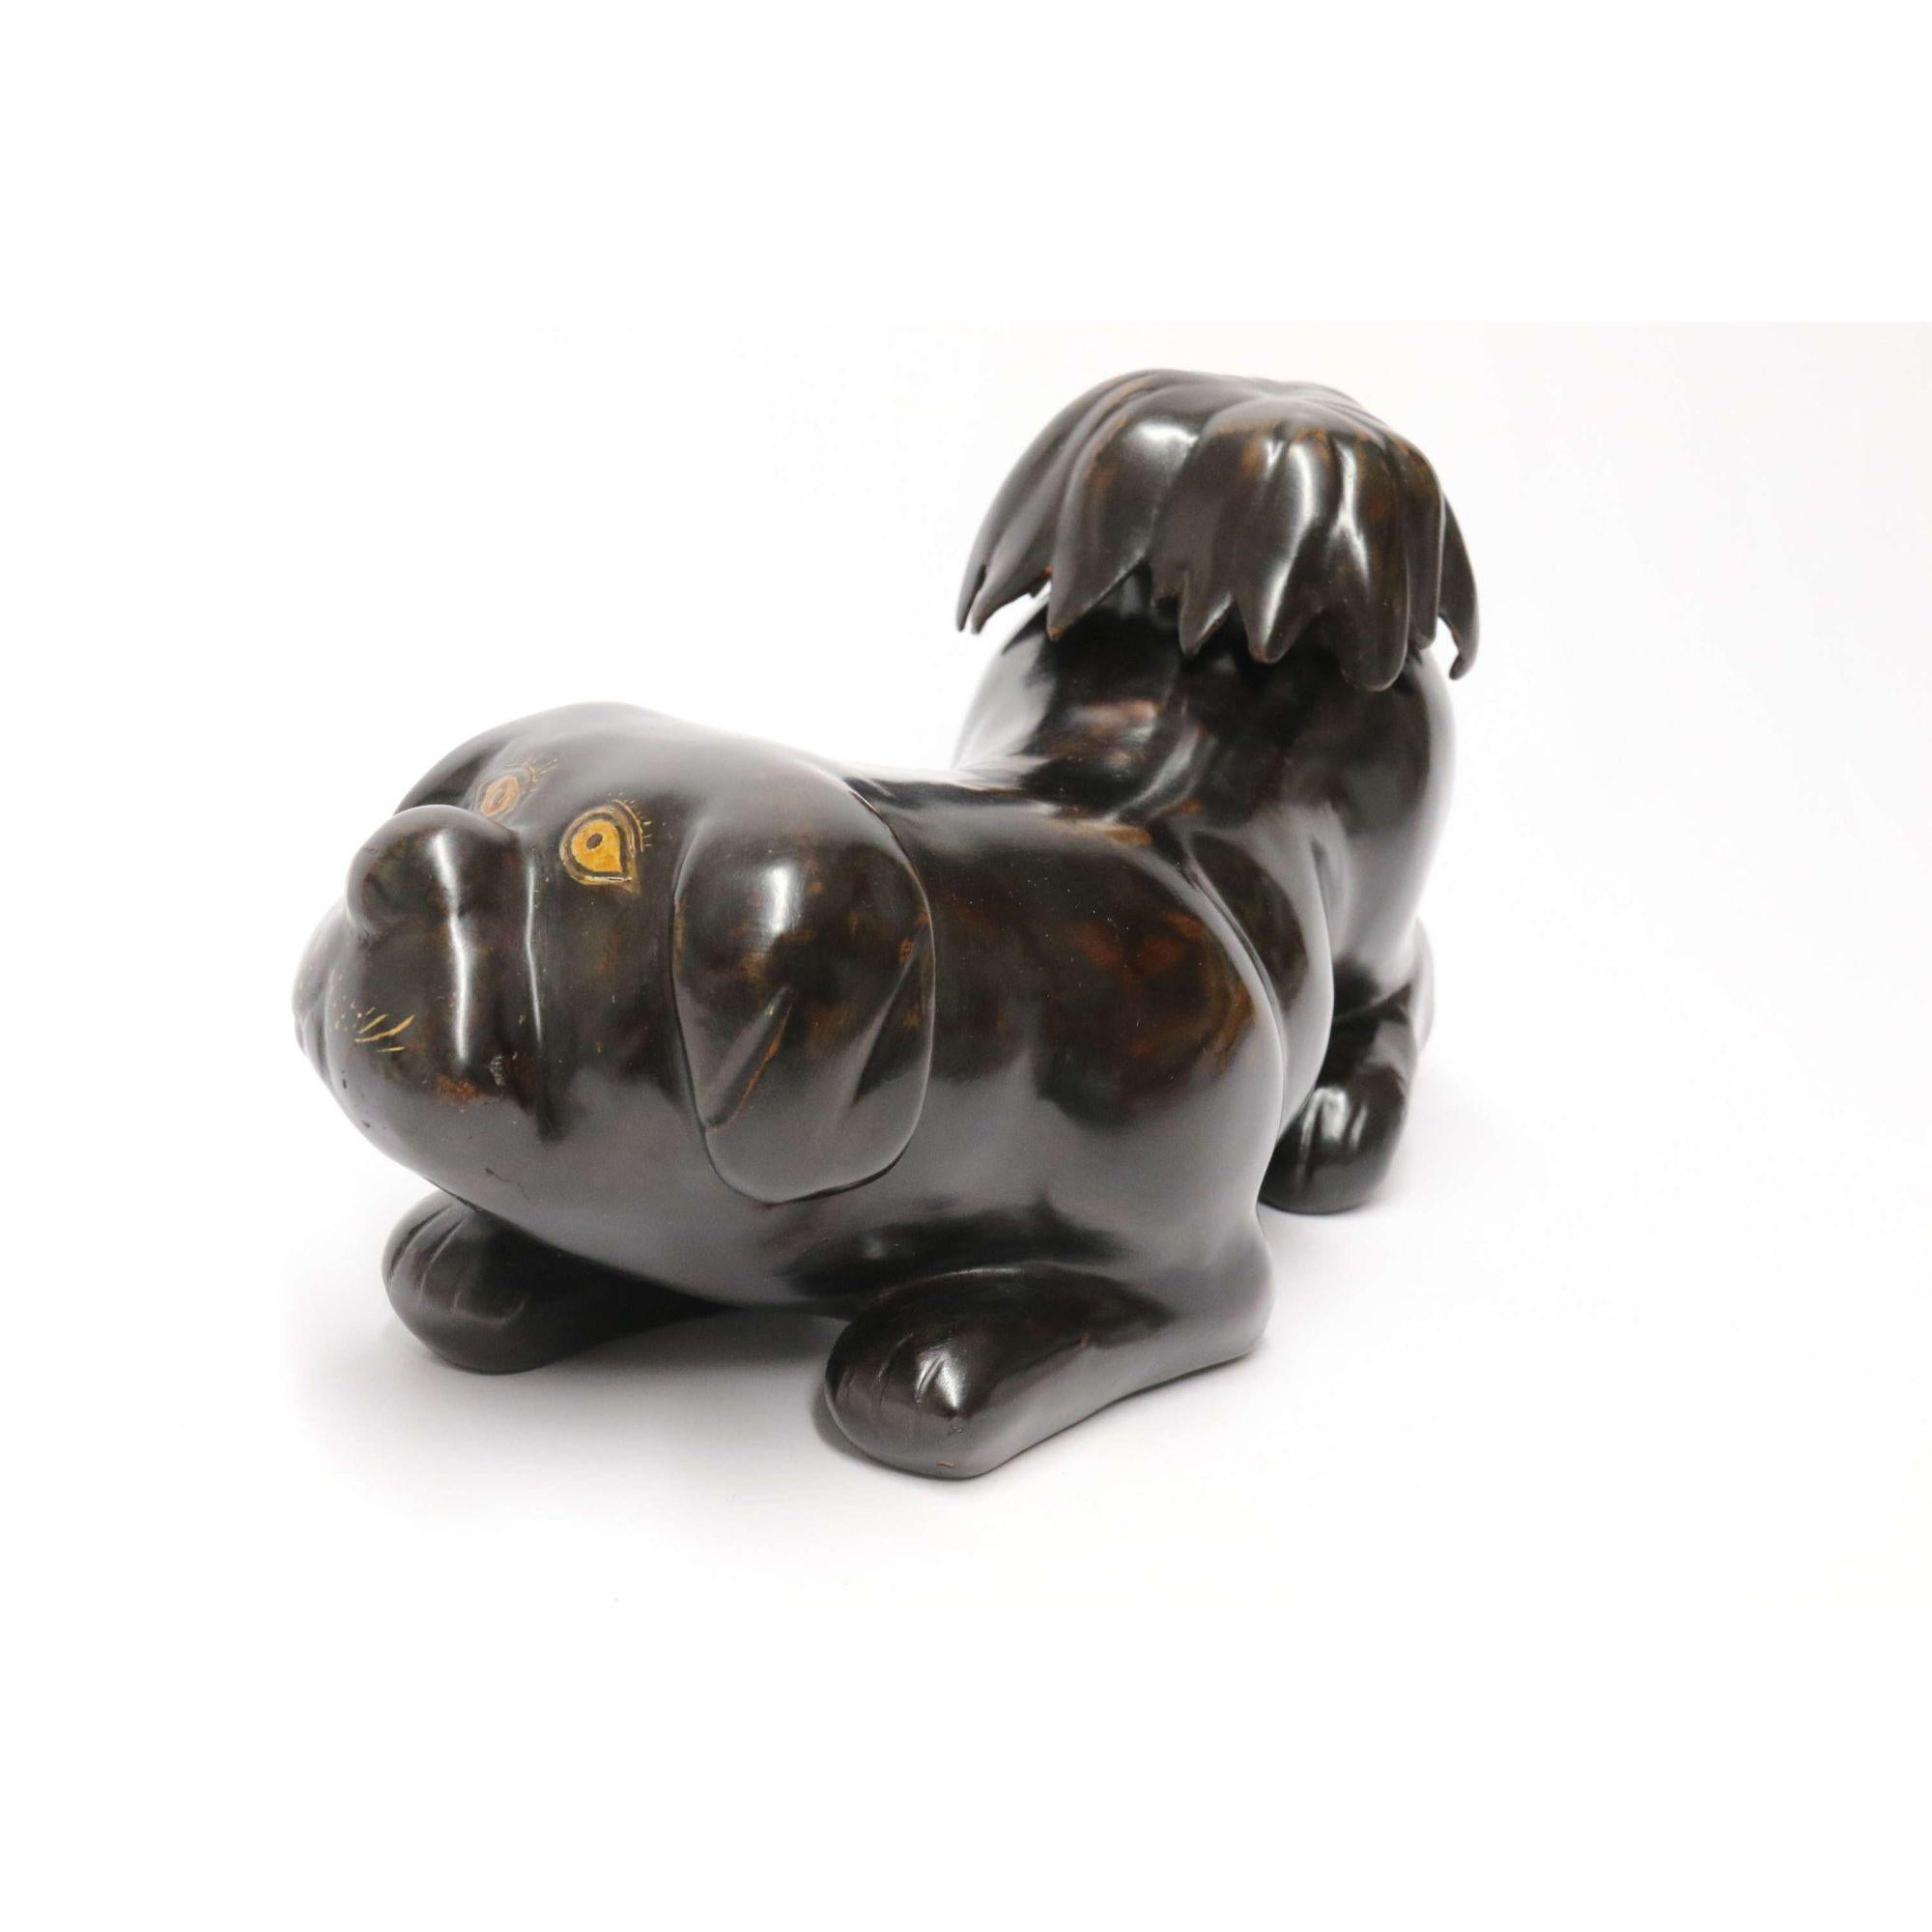 Other 19th Century Japanese Papier Mache Container in the Form of a Puppy Dog